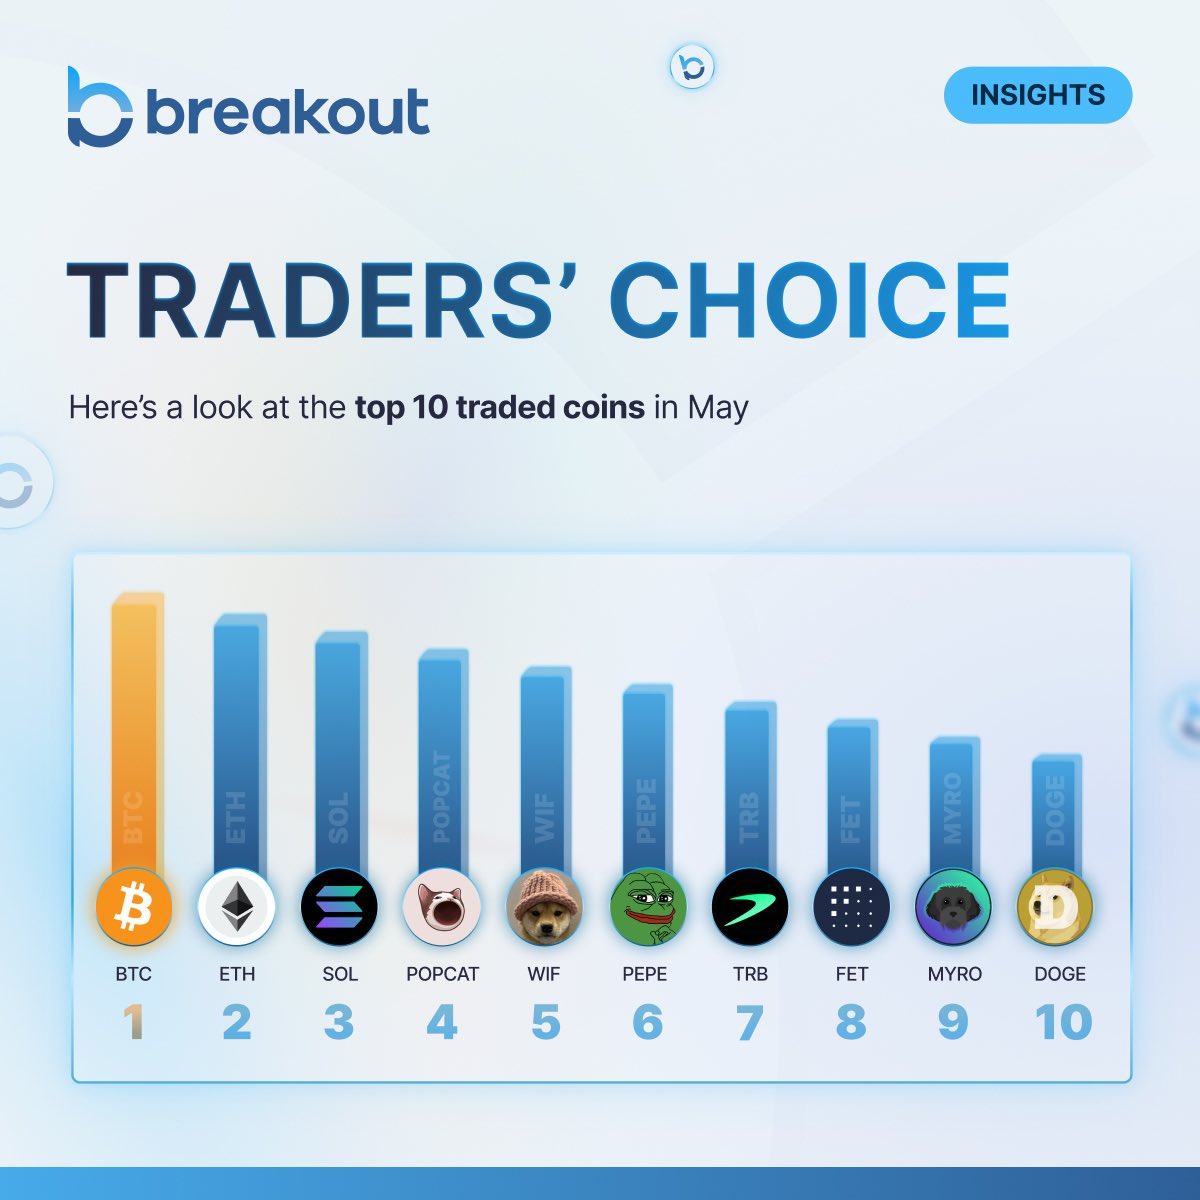 Top 10 most traded coins in May so far 🏆 $BTC and $ETH in the top spots is not surprising. $POPCAT flipping $WIF is surprising 👀 Memecoins and AI coins continue to lead. More symbols = more opportunities, and Breakout has nearly 100 coins & tokens trading 24/7.